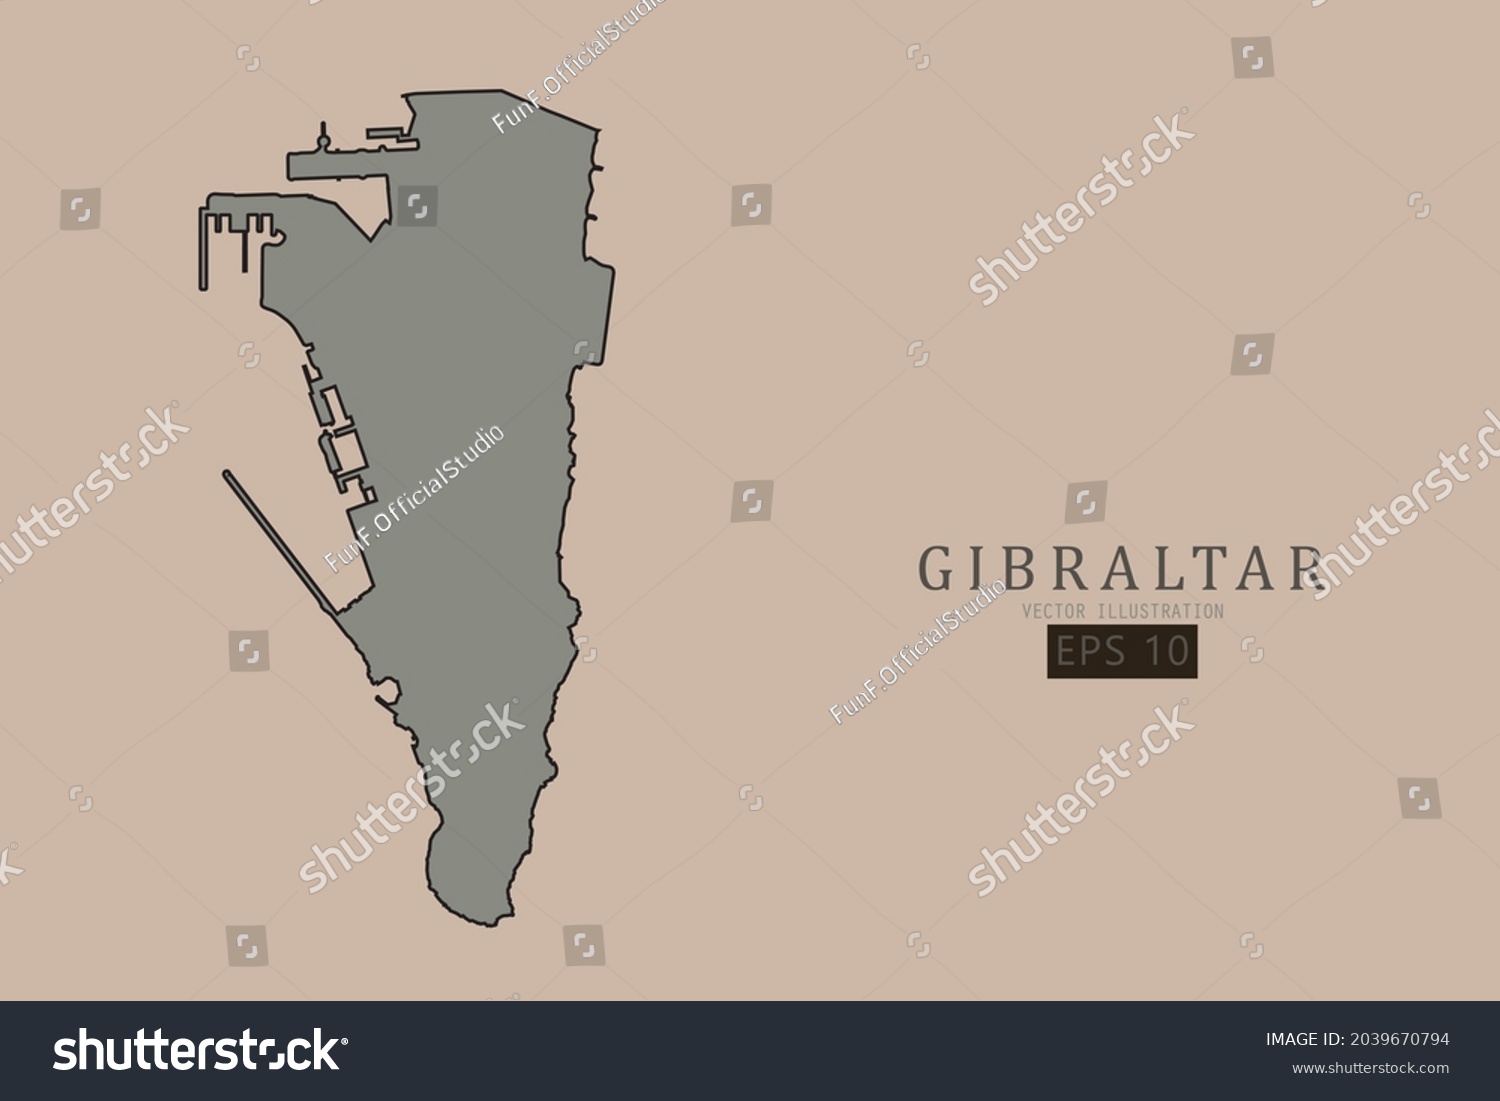 Stock Vector Gibraltar Map World Map International Vector Template With Old Classic Style And Gray Color On 2039670794 